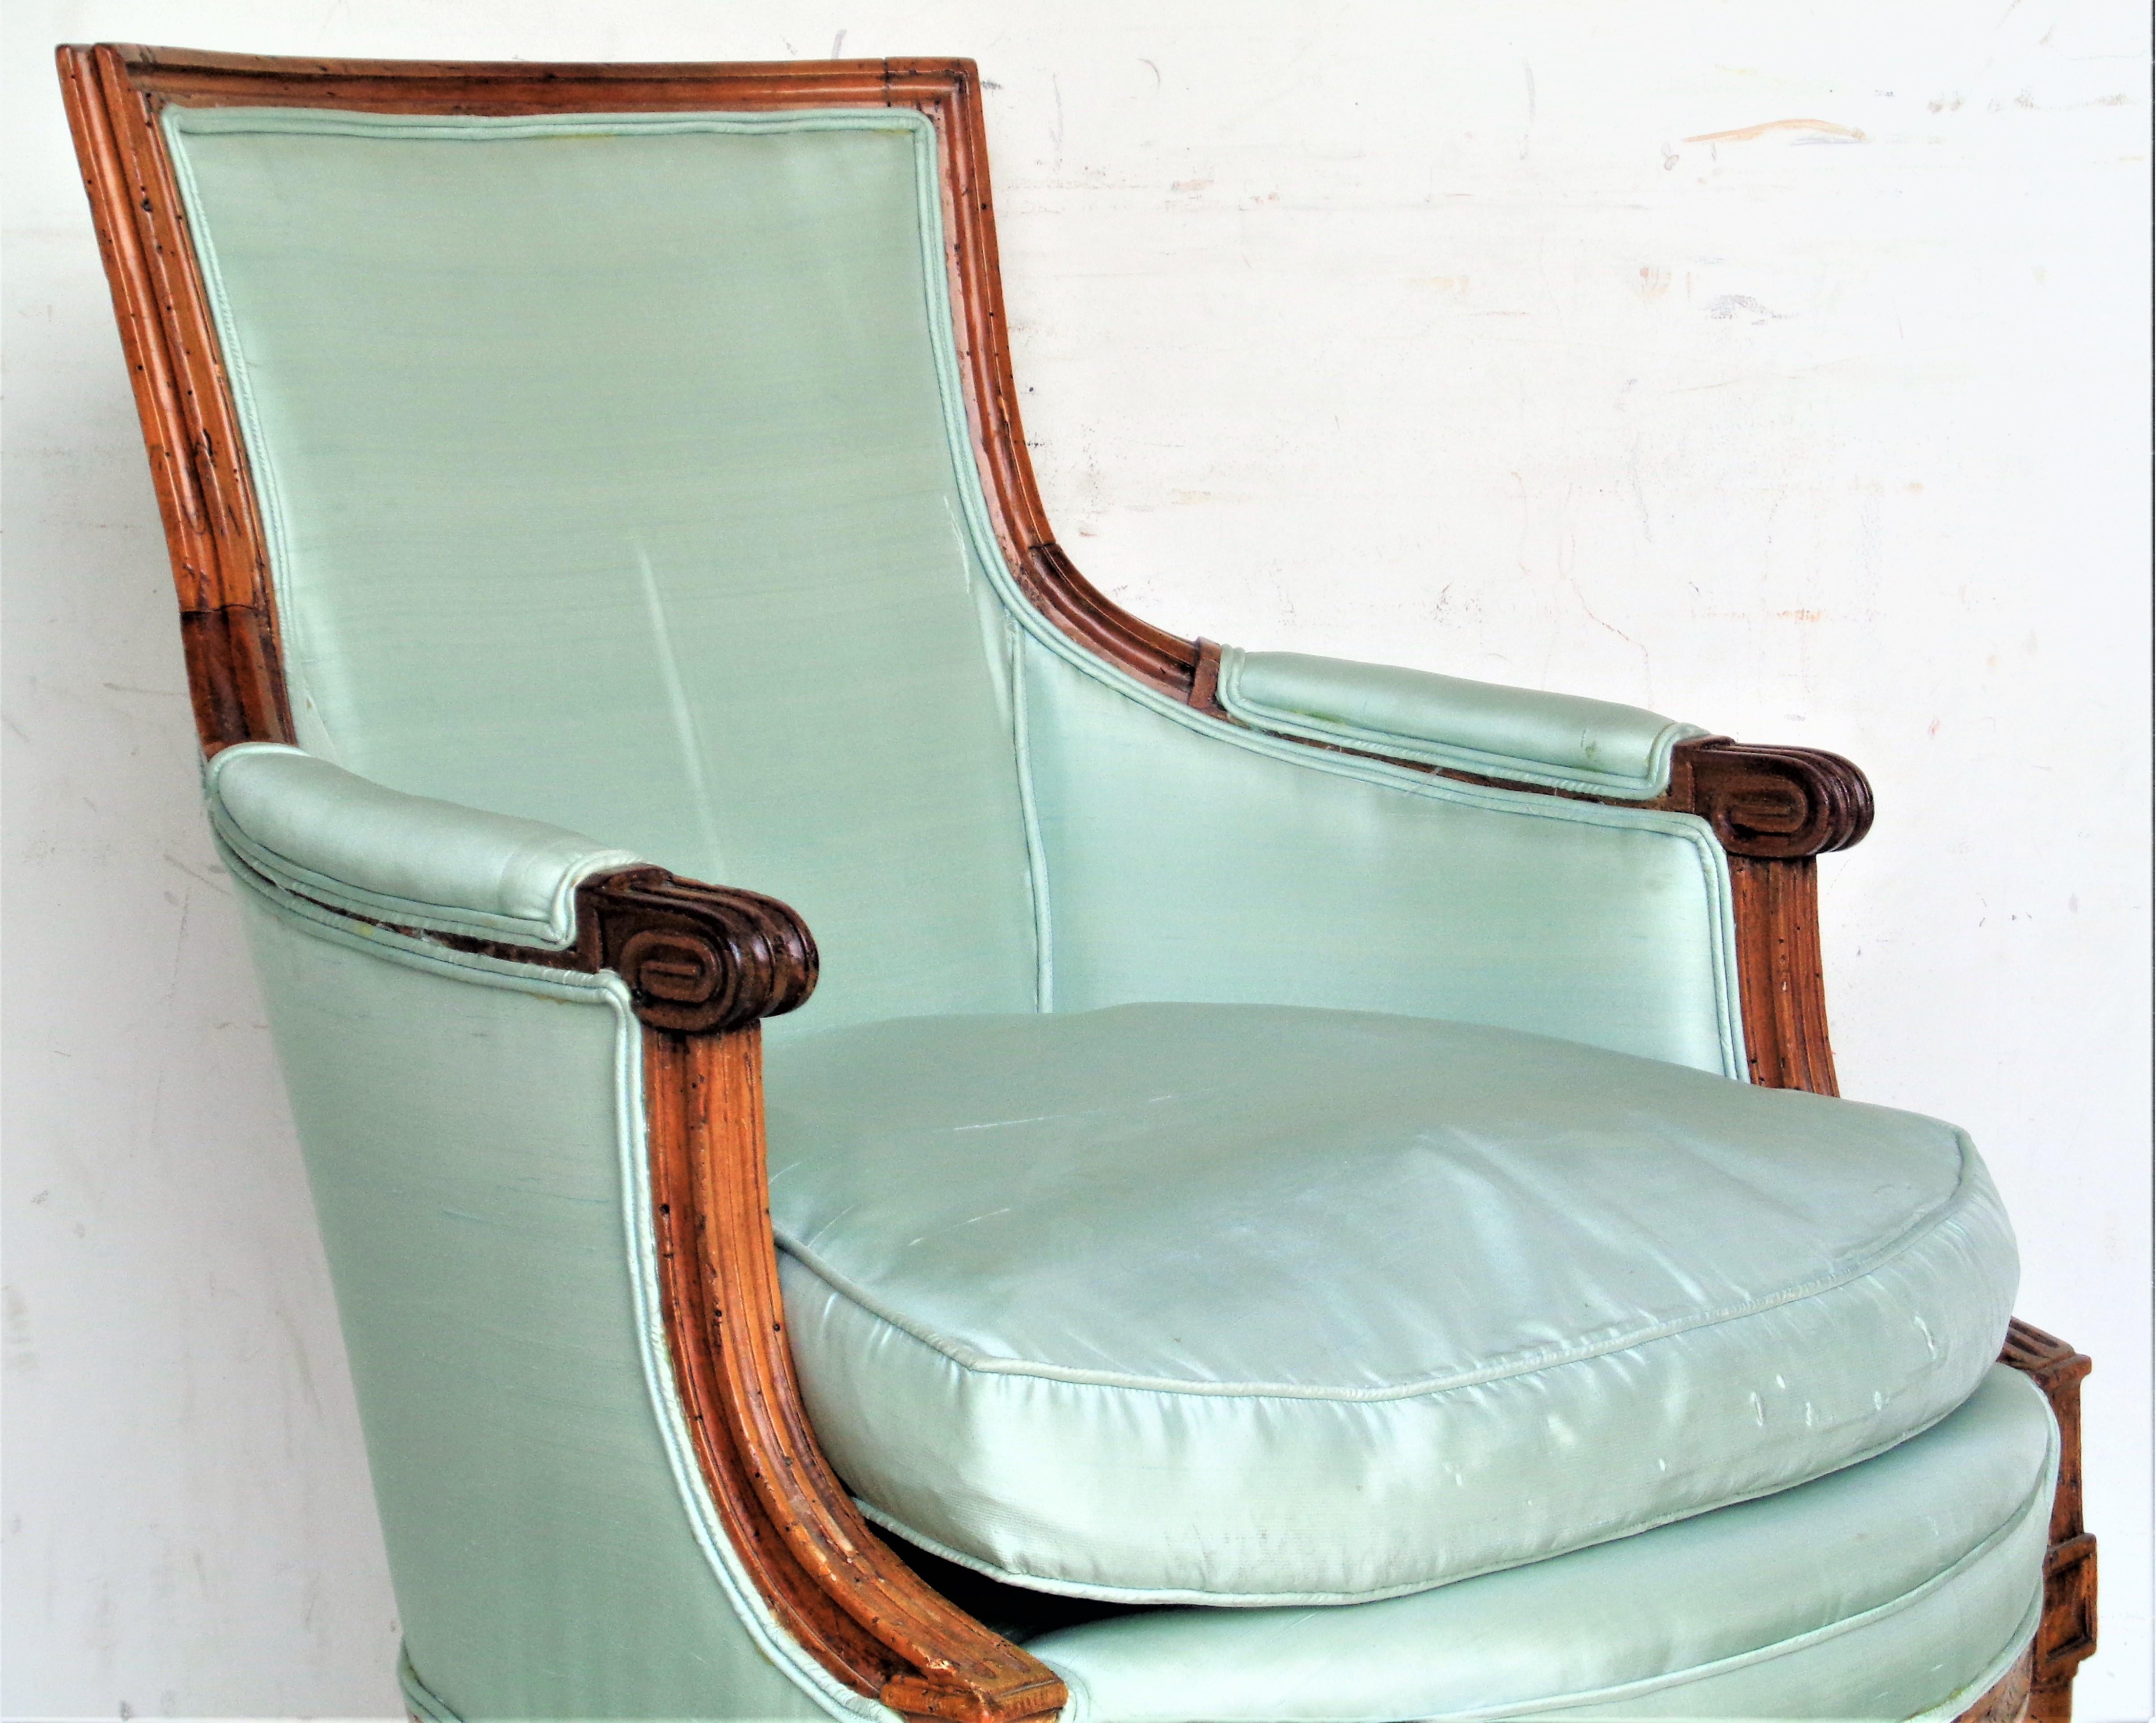 French 18th century Louis XVI carved fruitwood marquise / bergere in beautifully aged warm honey colored surface to wood. All original early construction. Vintage lightly worn pale mint green silk upholstery soft and plush. Look at all pictures and